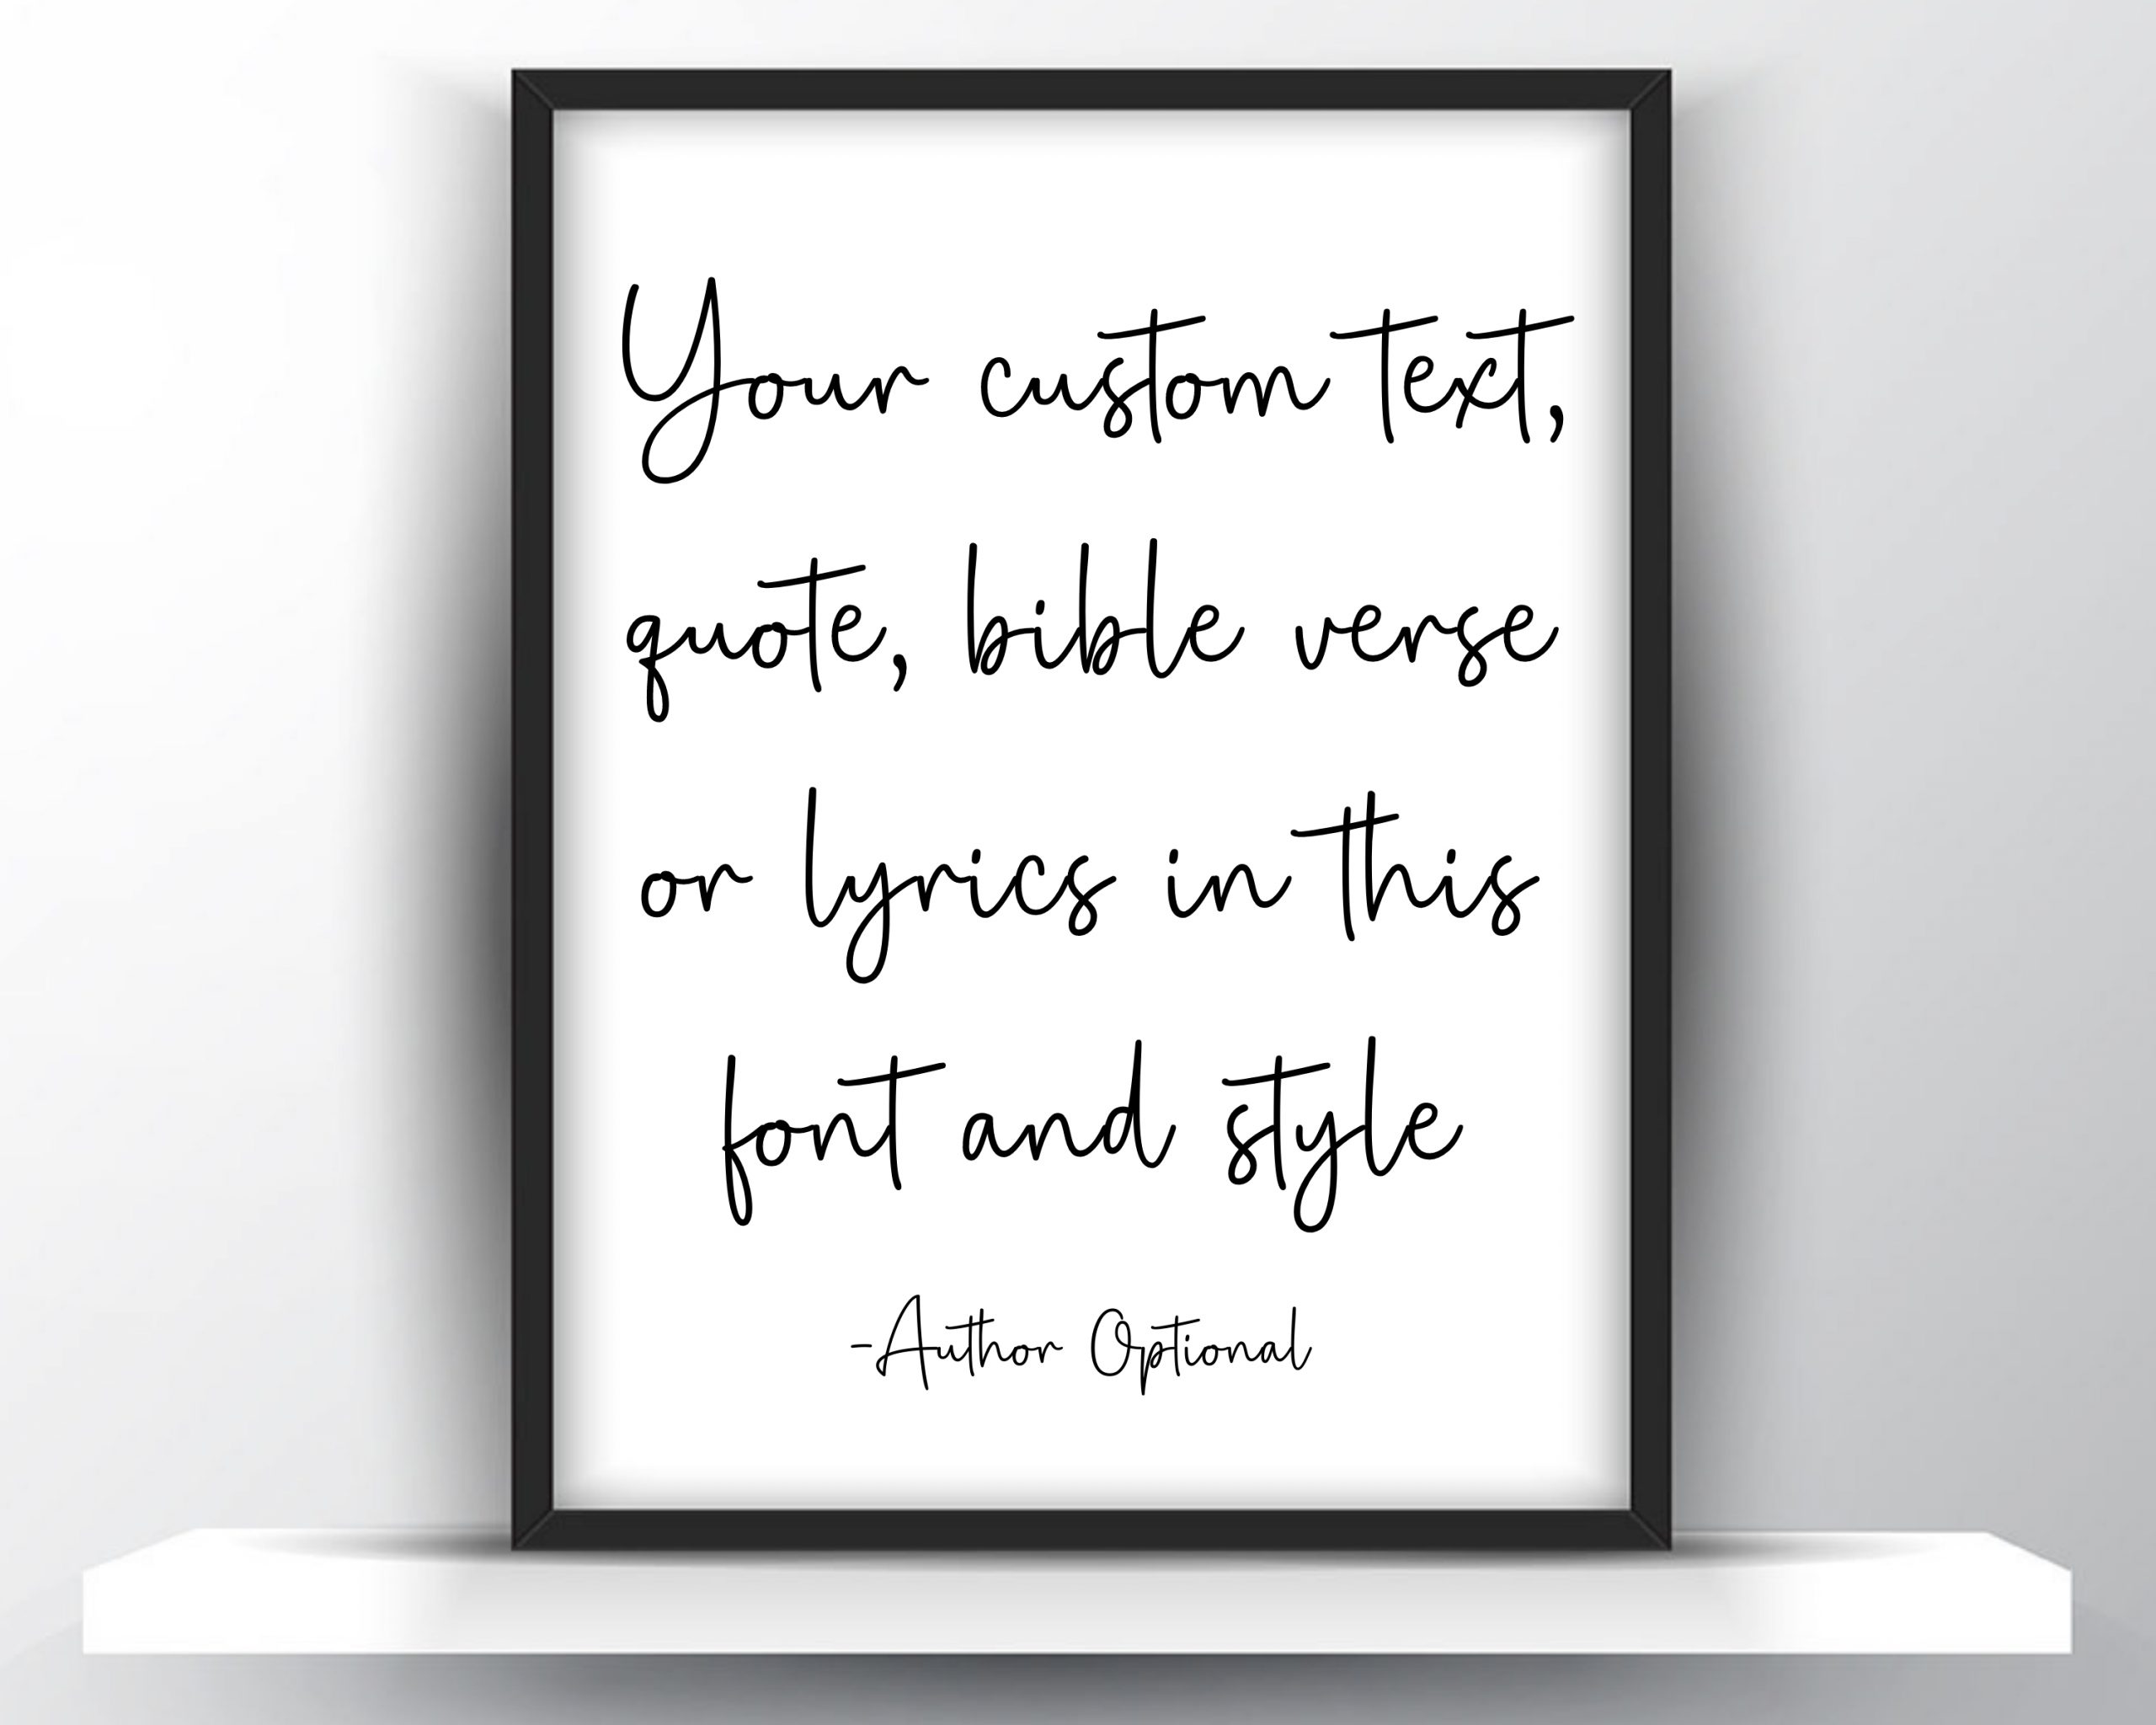 Custom downloadable quote print Custom quote poster printable wall art personalized quote print quote art print custom wall art